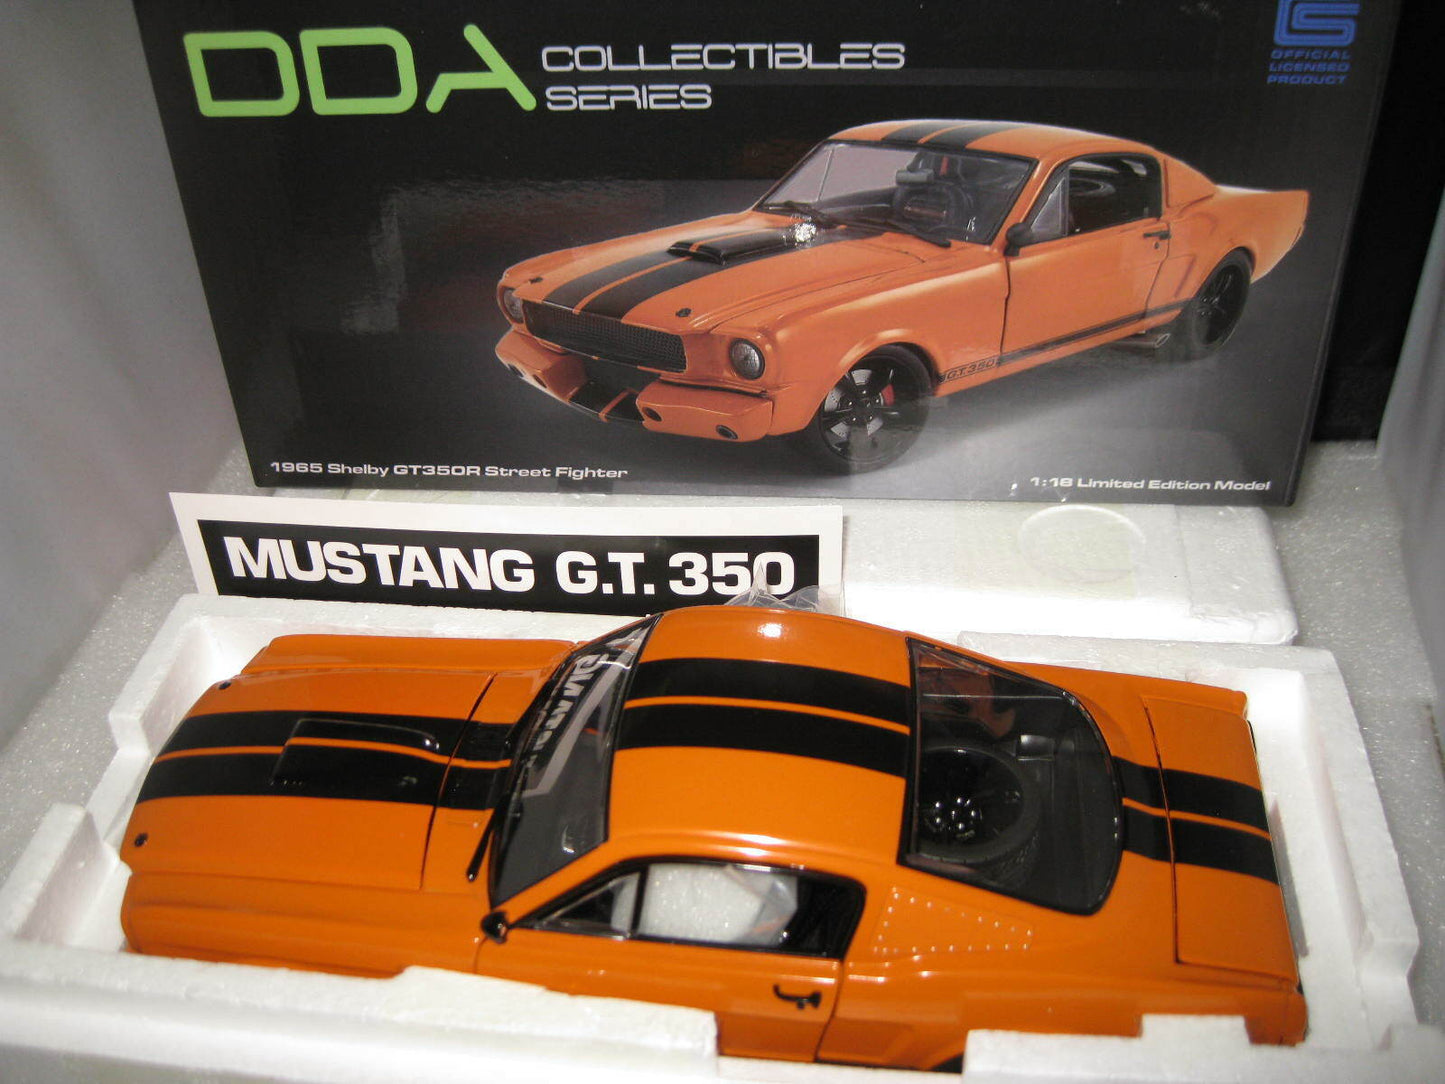 DDA Acme 1/18 Ford Mustang 1965 Shelby Gt350R Twister Orange  Street Fighter